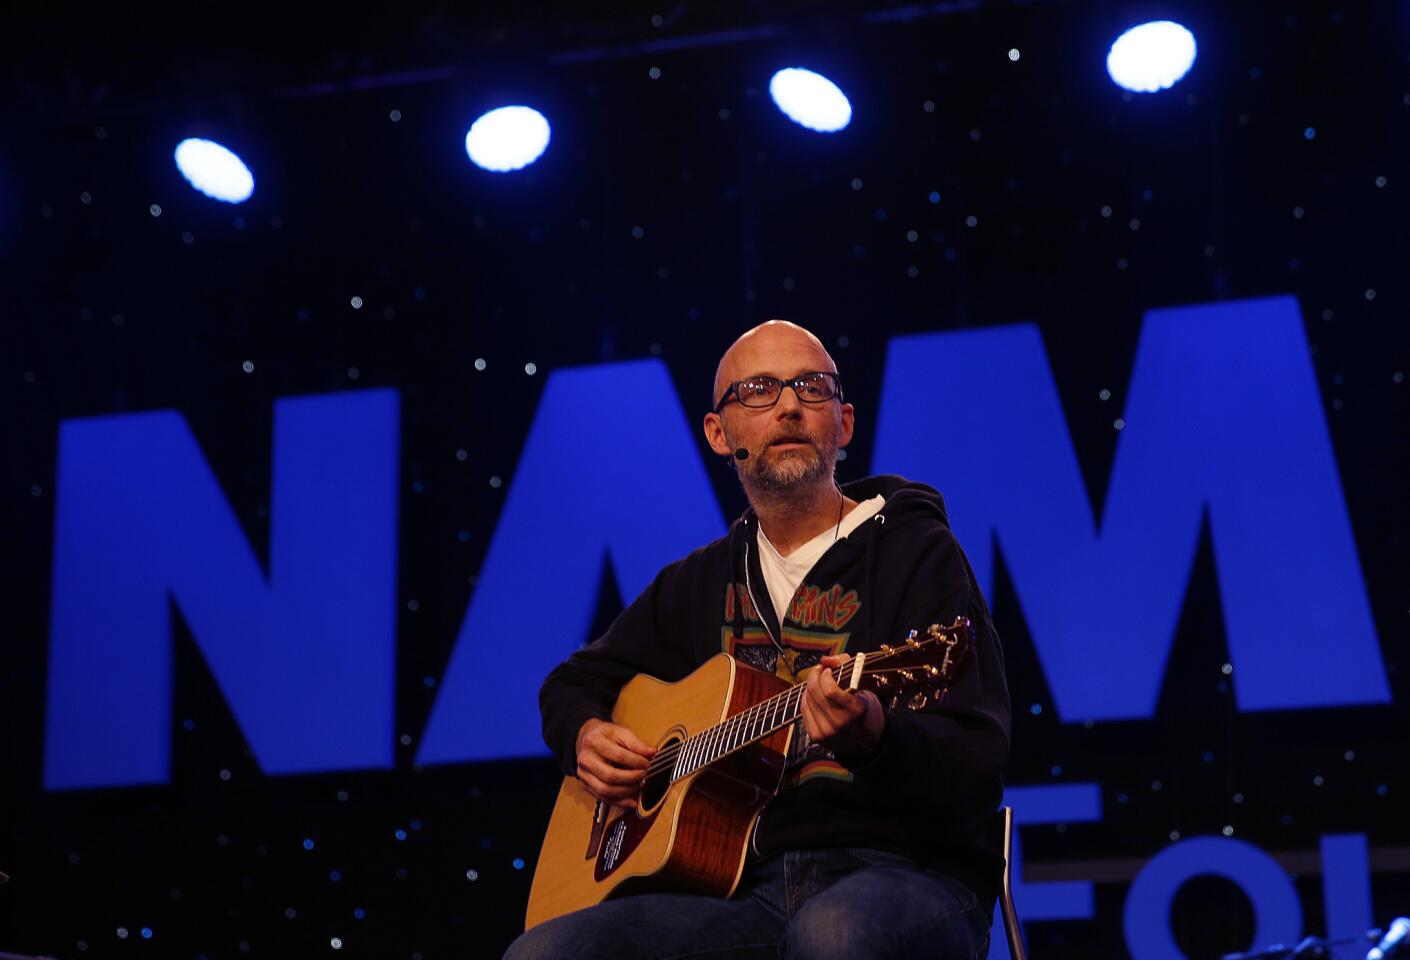 Moby plays an acoustic version of Billy Idol's 'Rebel Yell' in the NAMM Foundation Lounge during the 2015 NAMM show at the Anaheim Convention Center.